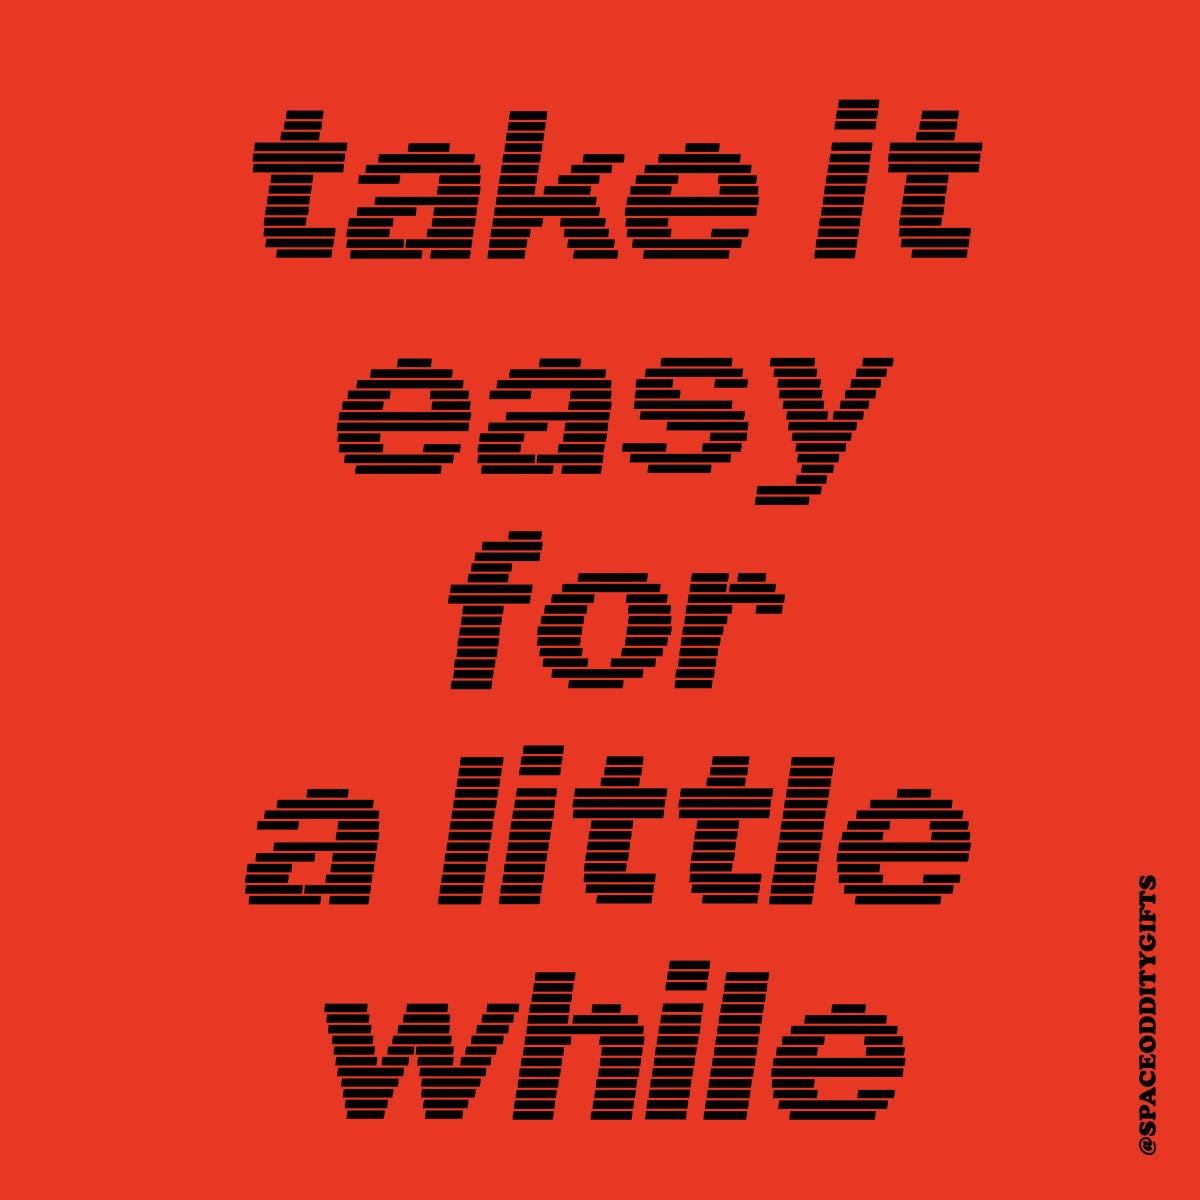 Take It Easy For A Little While Print